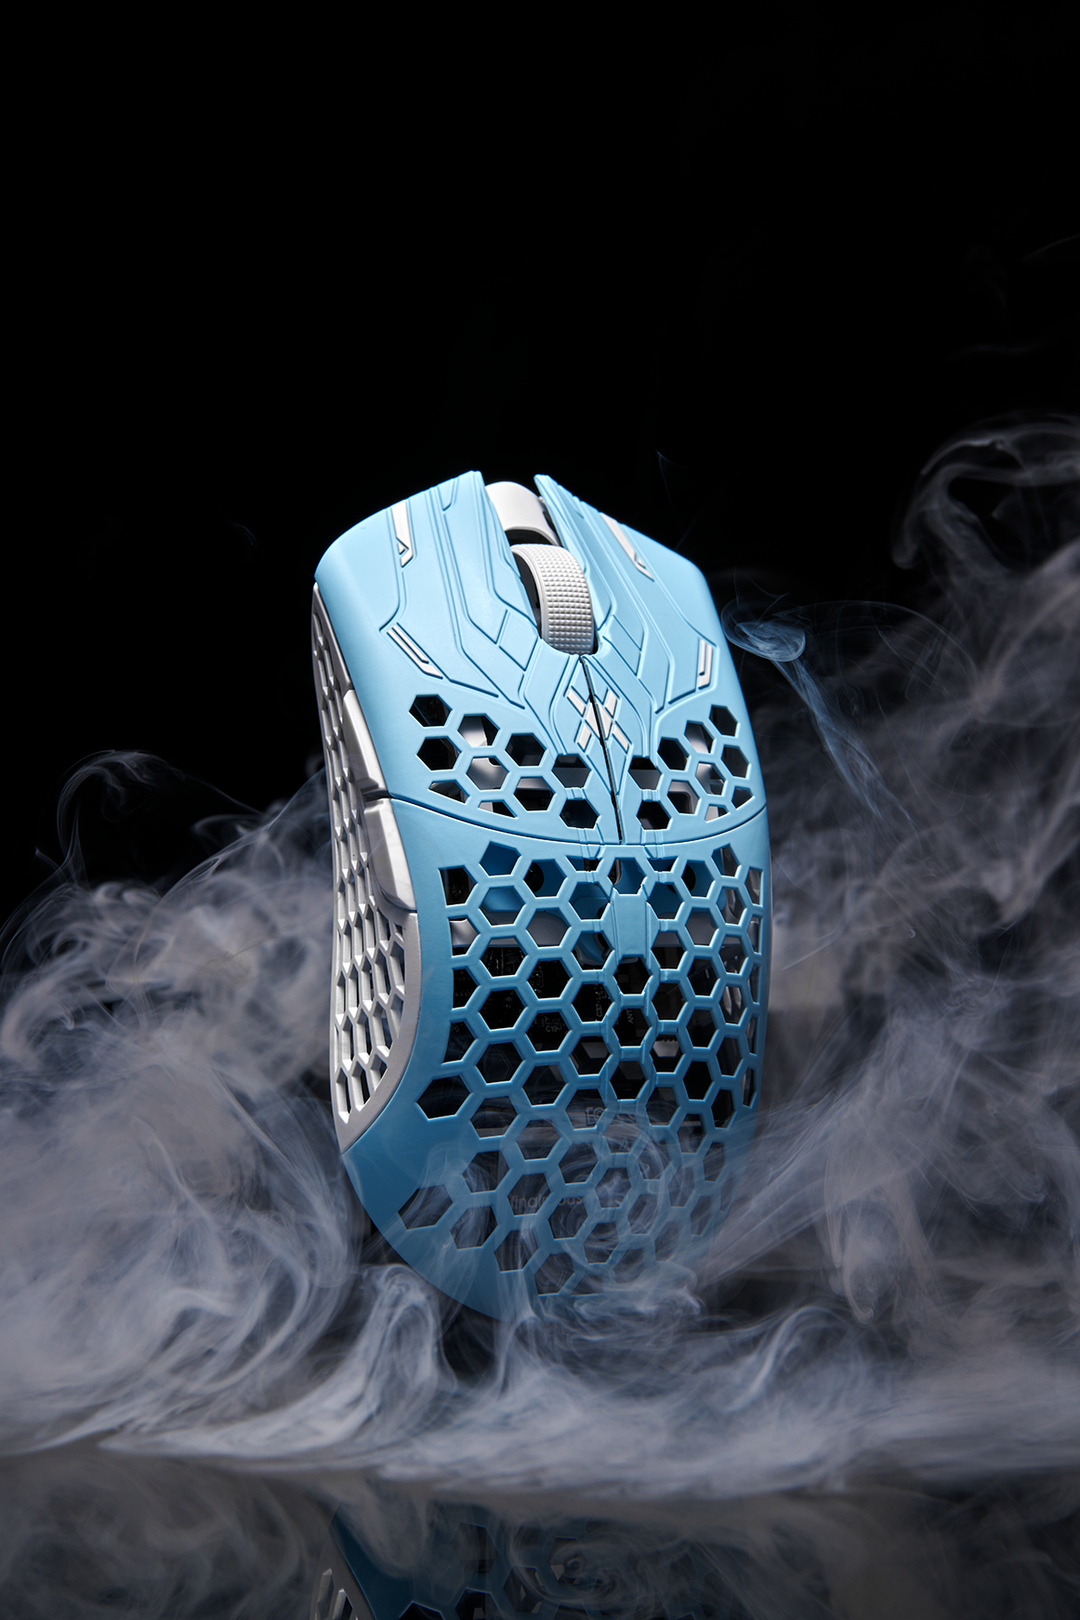 ULX Pro Series – Finalmouse